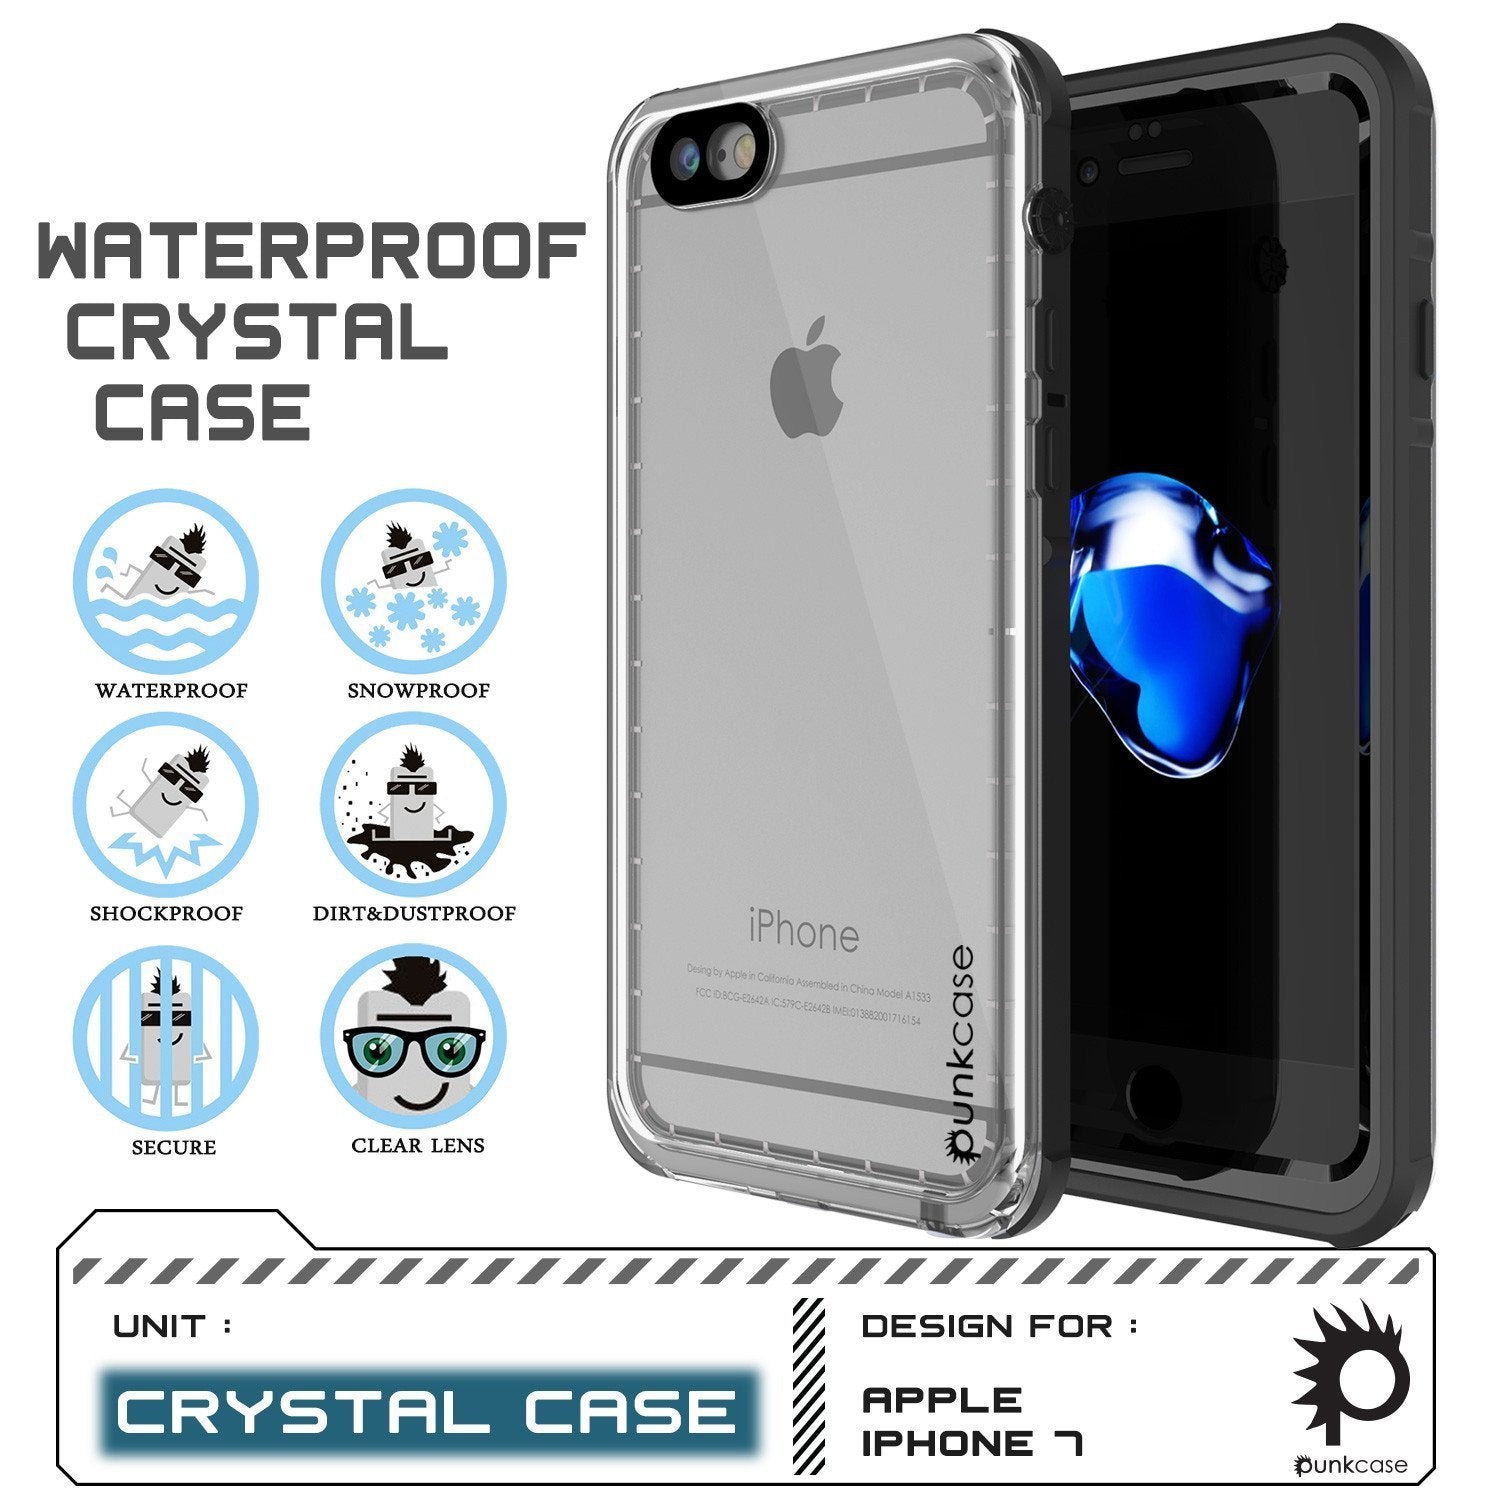 Apple iPhone SE (4.7") Waterproof Case, PUNKcase CRYSTAL Black W/ Attached Screen Protector  | Warranty